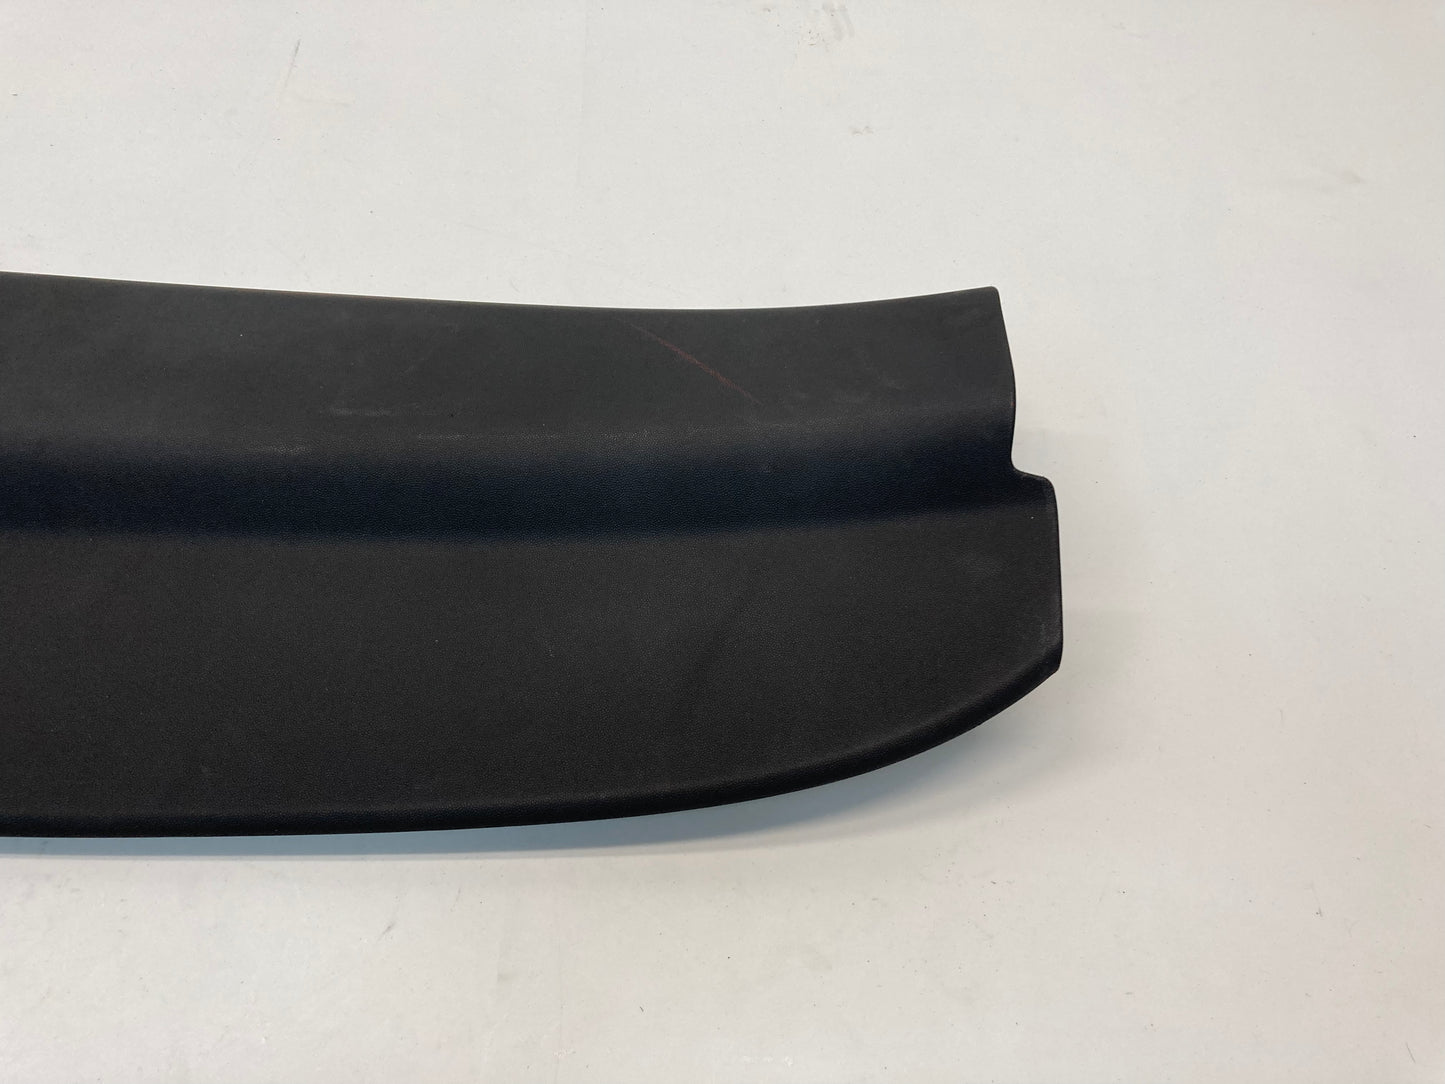 Mini Roadster Convertible Top Front Covering Trim 54342759741 12-15 R59